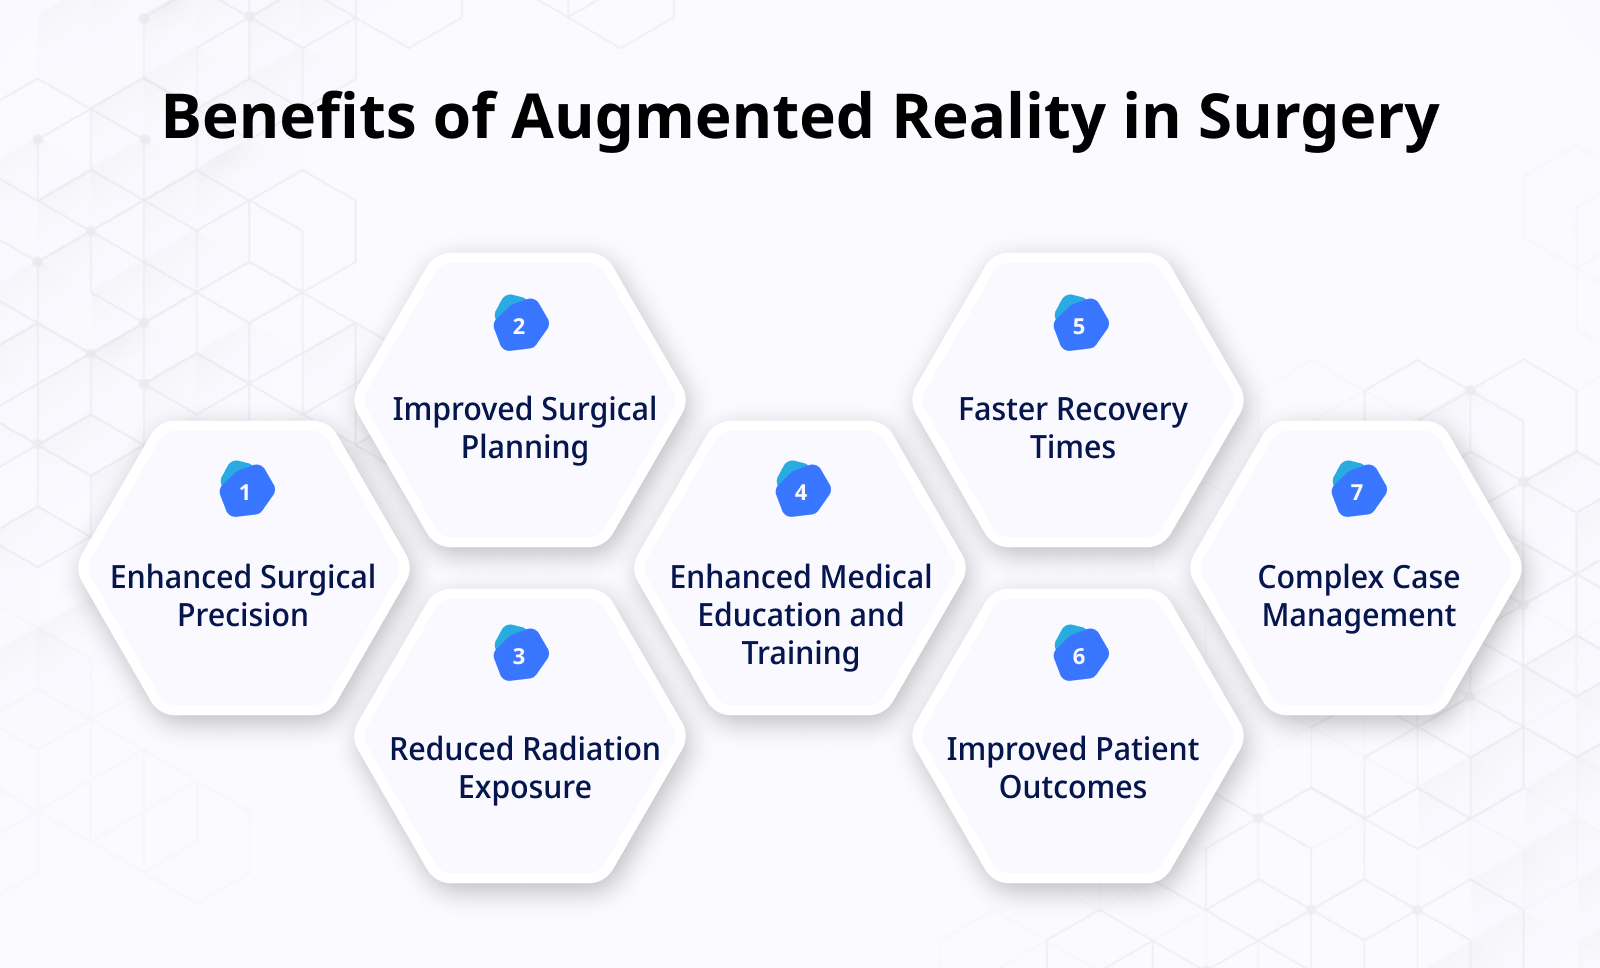 Benefits of Augmented Reality in Surgery